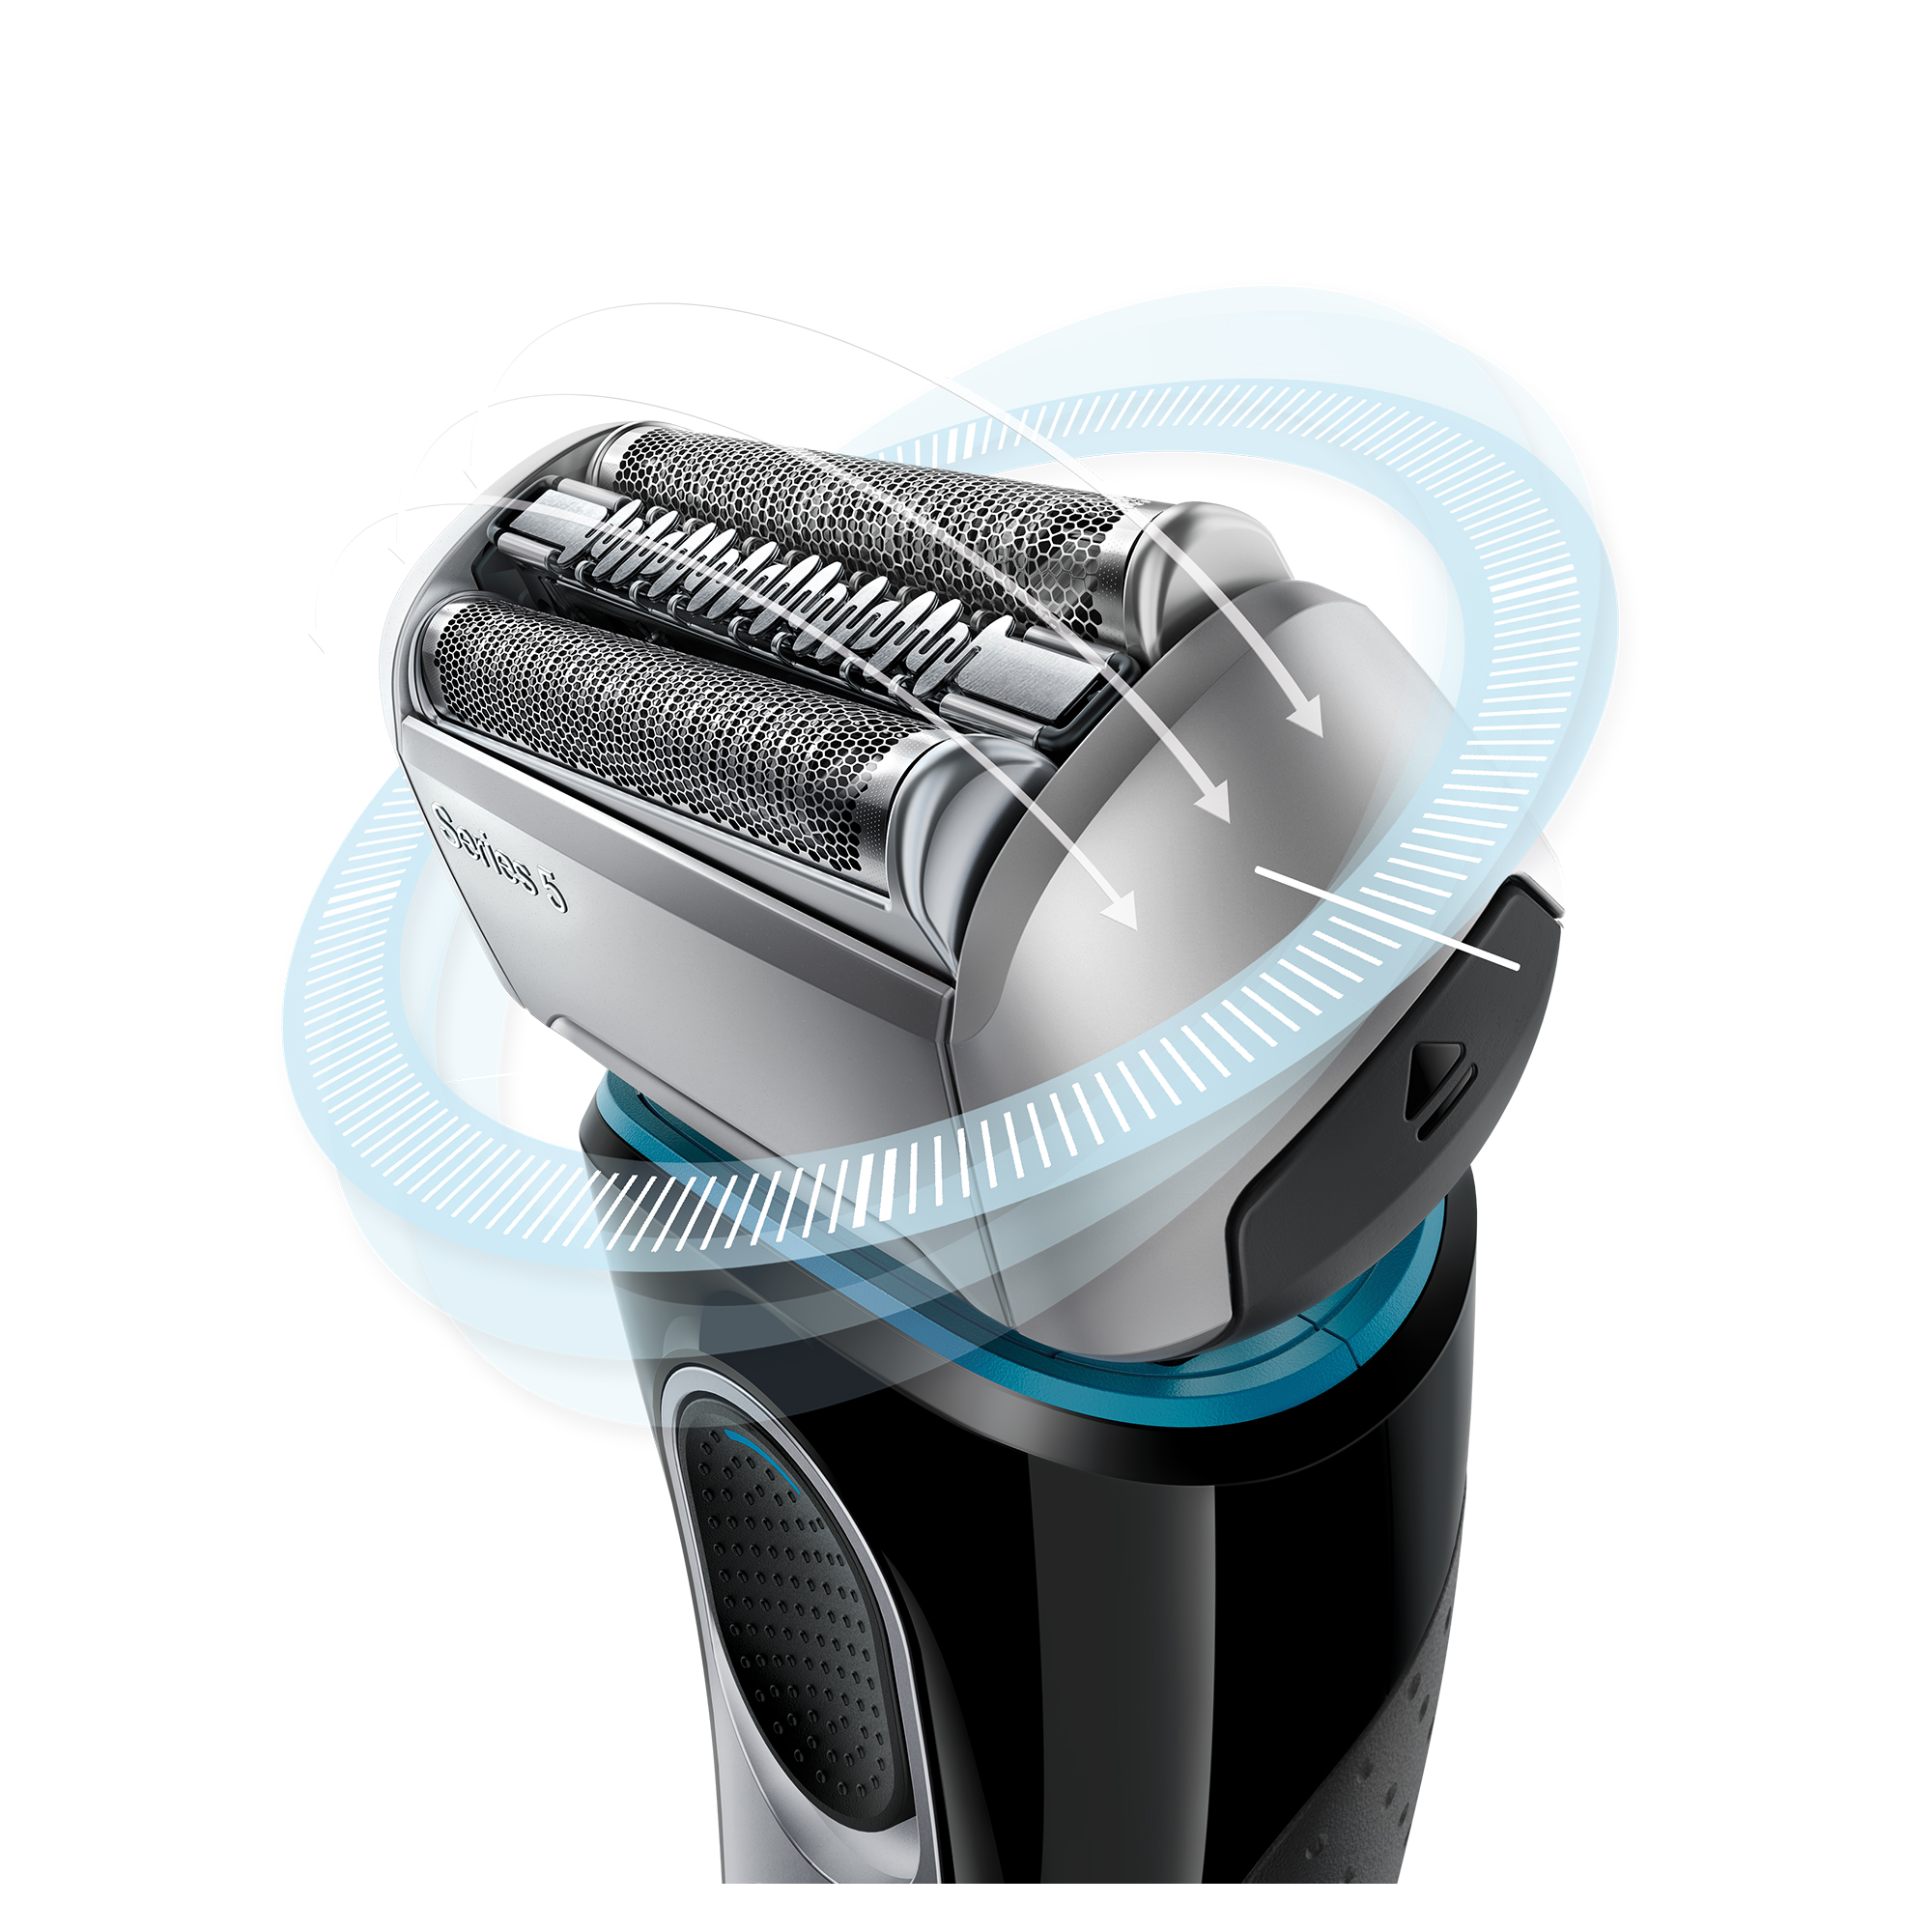 Braun Series 5 5190cc Mens Wet Dry Electric Shaver with Clean Station - image 4 of 7